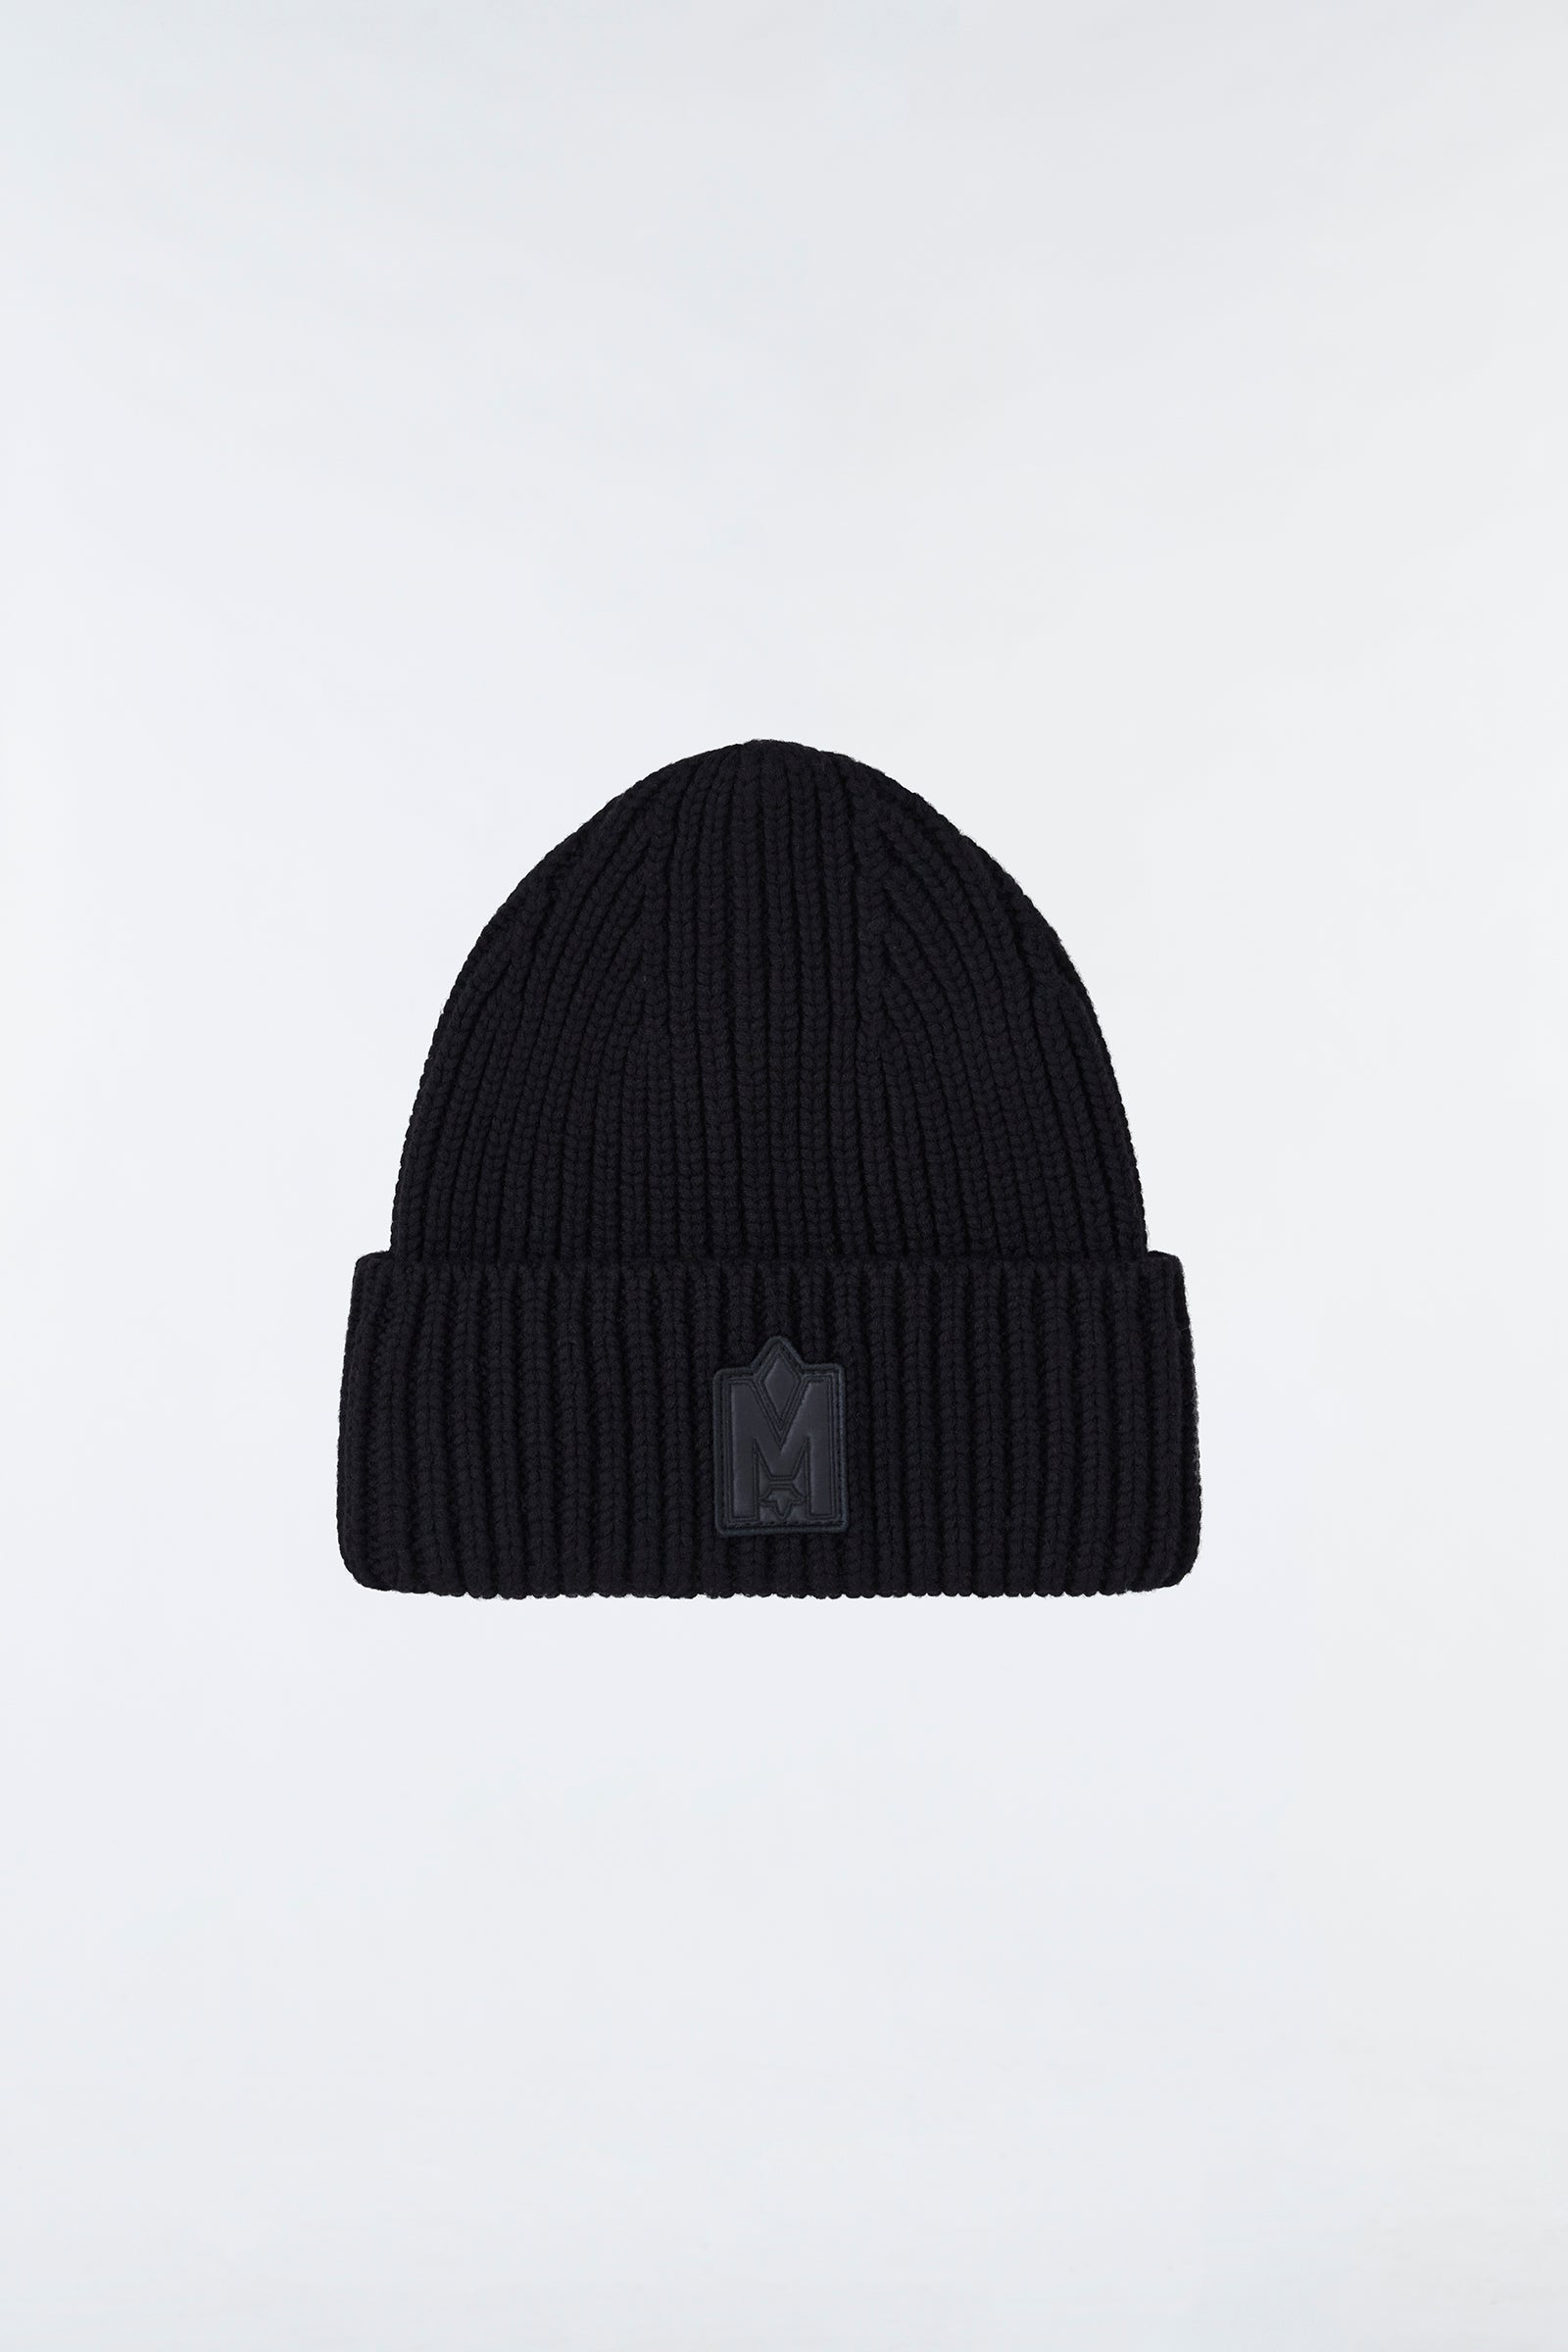 Mackage Jude Hand Knit Toque with Ribbed Cuff in Black